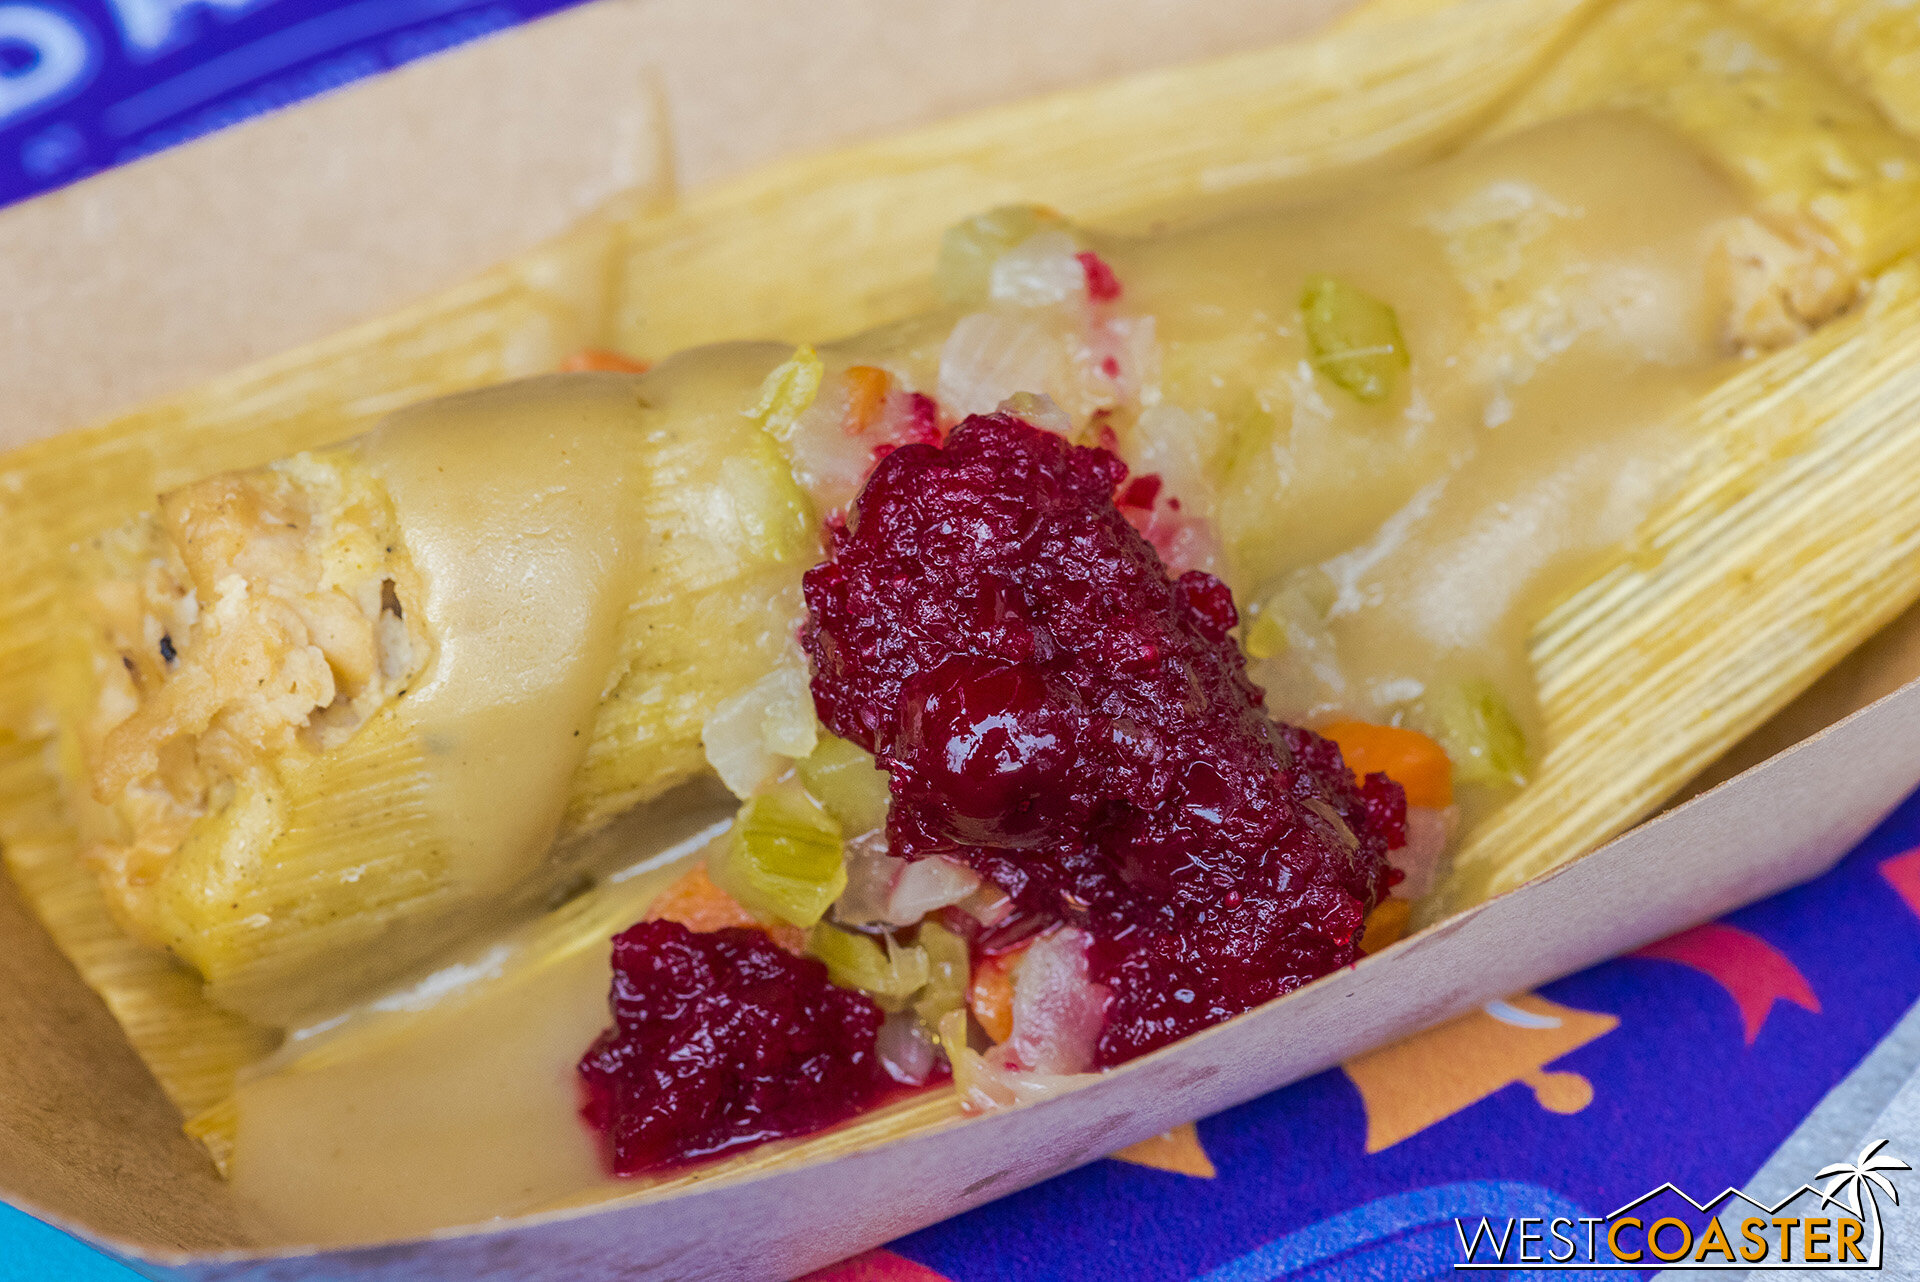  Merry Mashups Marketplace: Turkey &amp; Stuffing Tamale – With Cranberry Relish   This should be another great dish, but it was disappointing last year and this.  The tamale is rather dry, and the gravy and cranberry relish not really sufficient eno